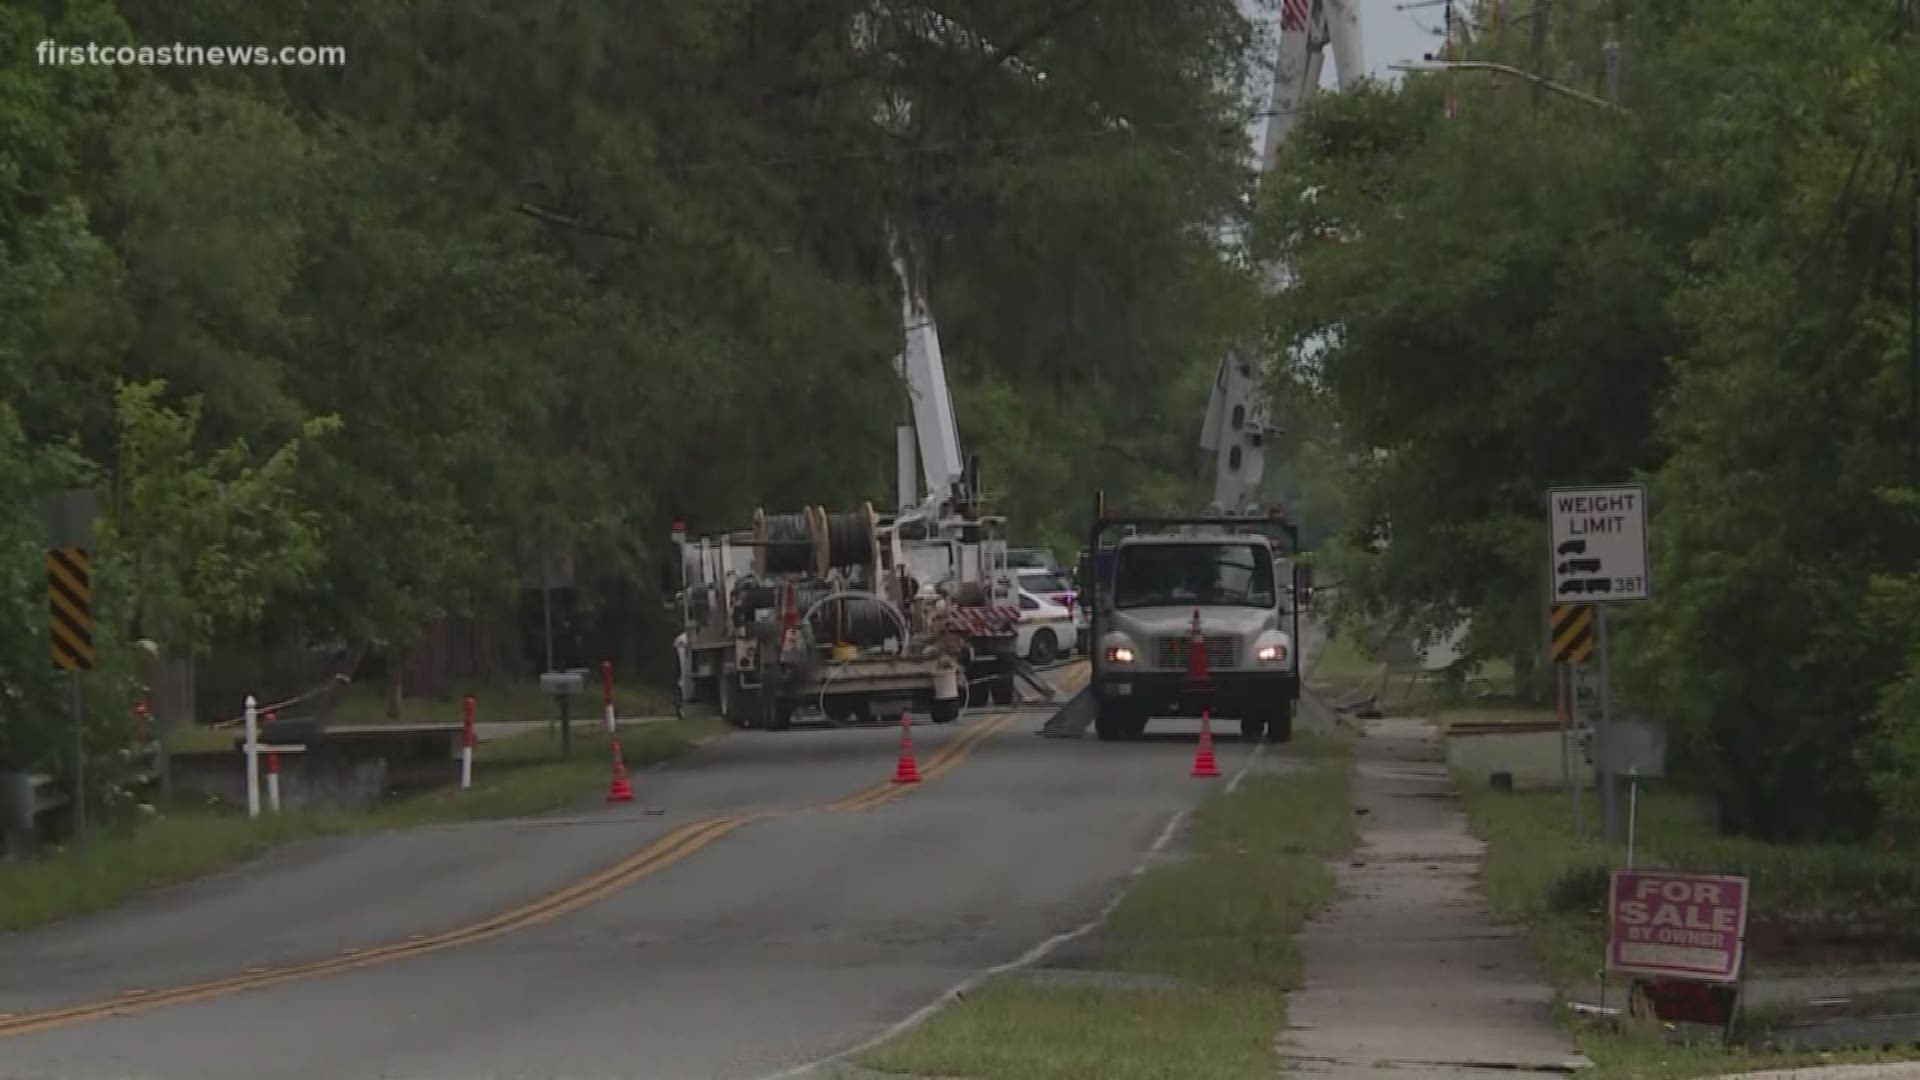 The downed power lines caused over 100 people to be without power as crews worked to clean-up the area.